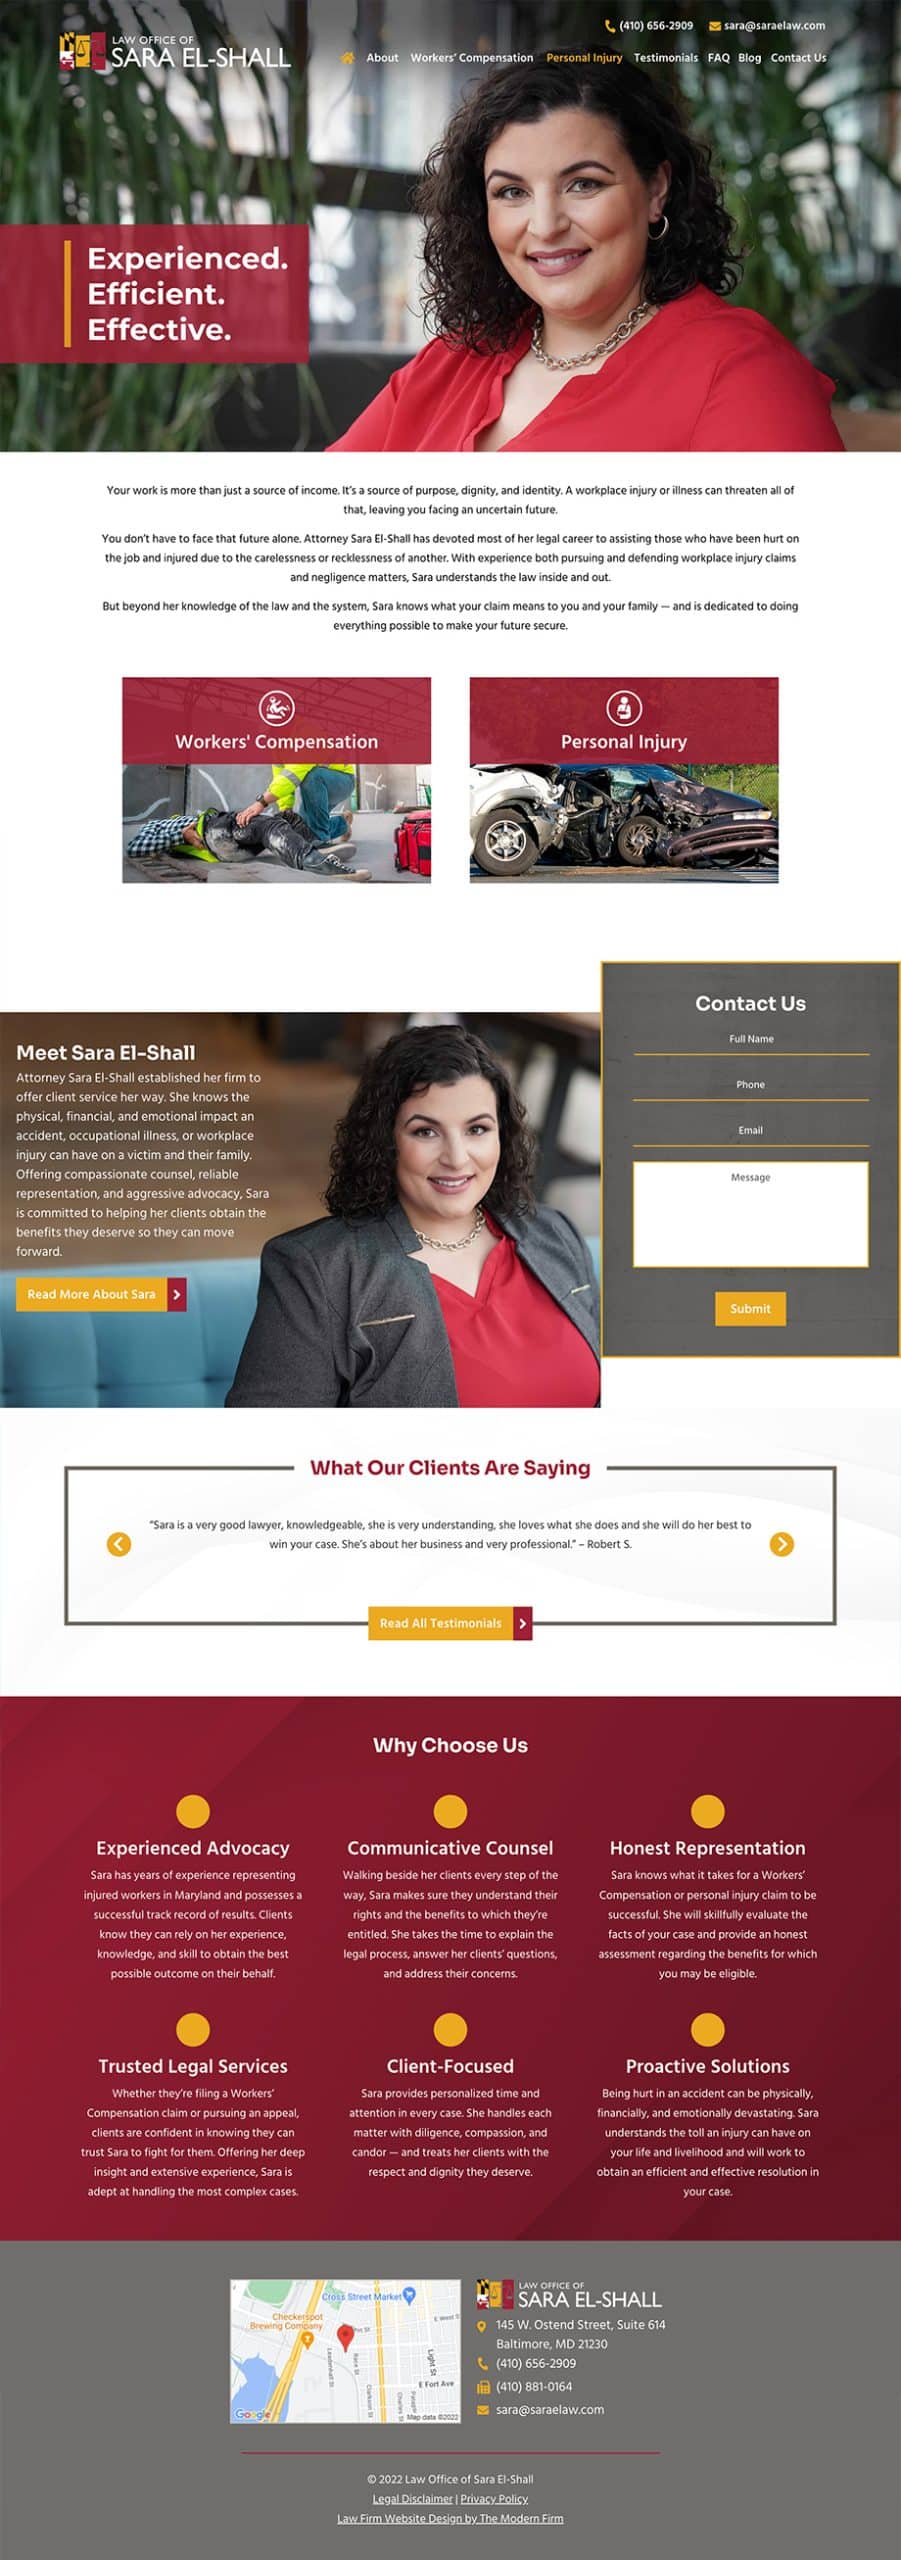 Law Firm Website Design for Law Office of Sara El-Shall